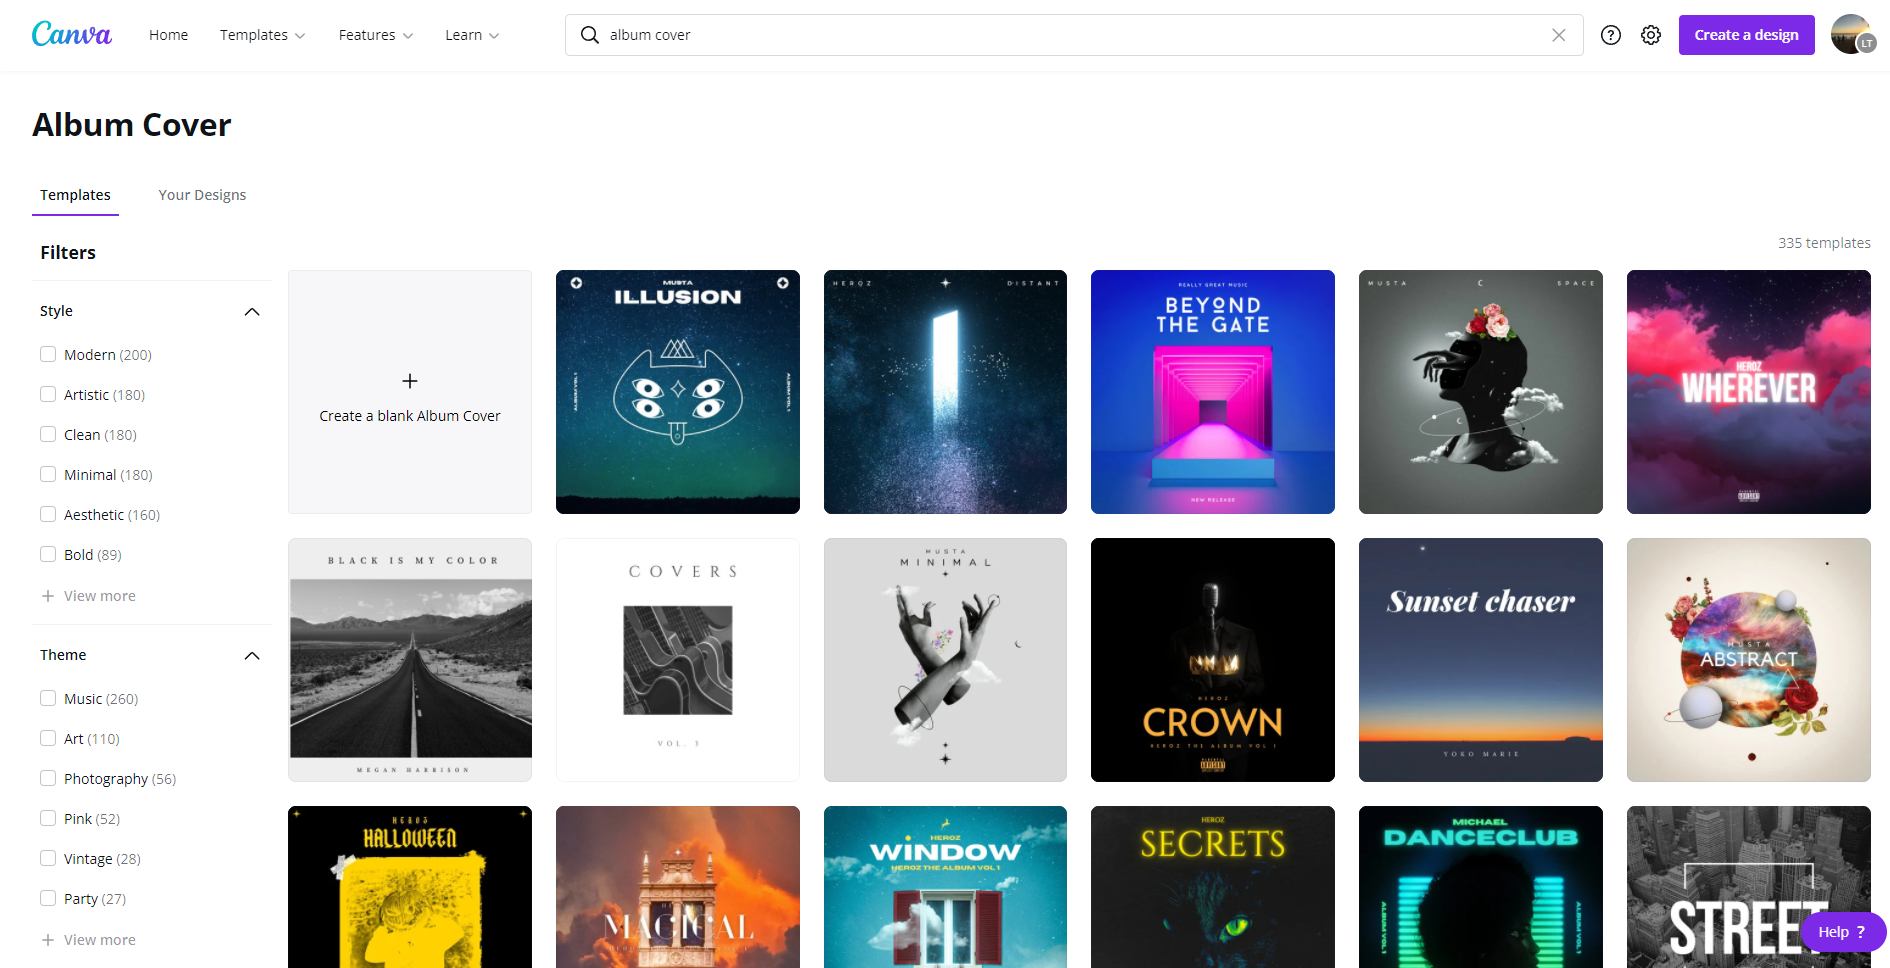 Different album cover templates available in Canva